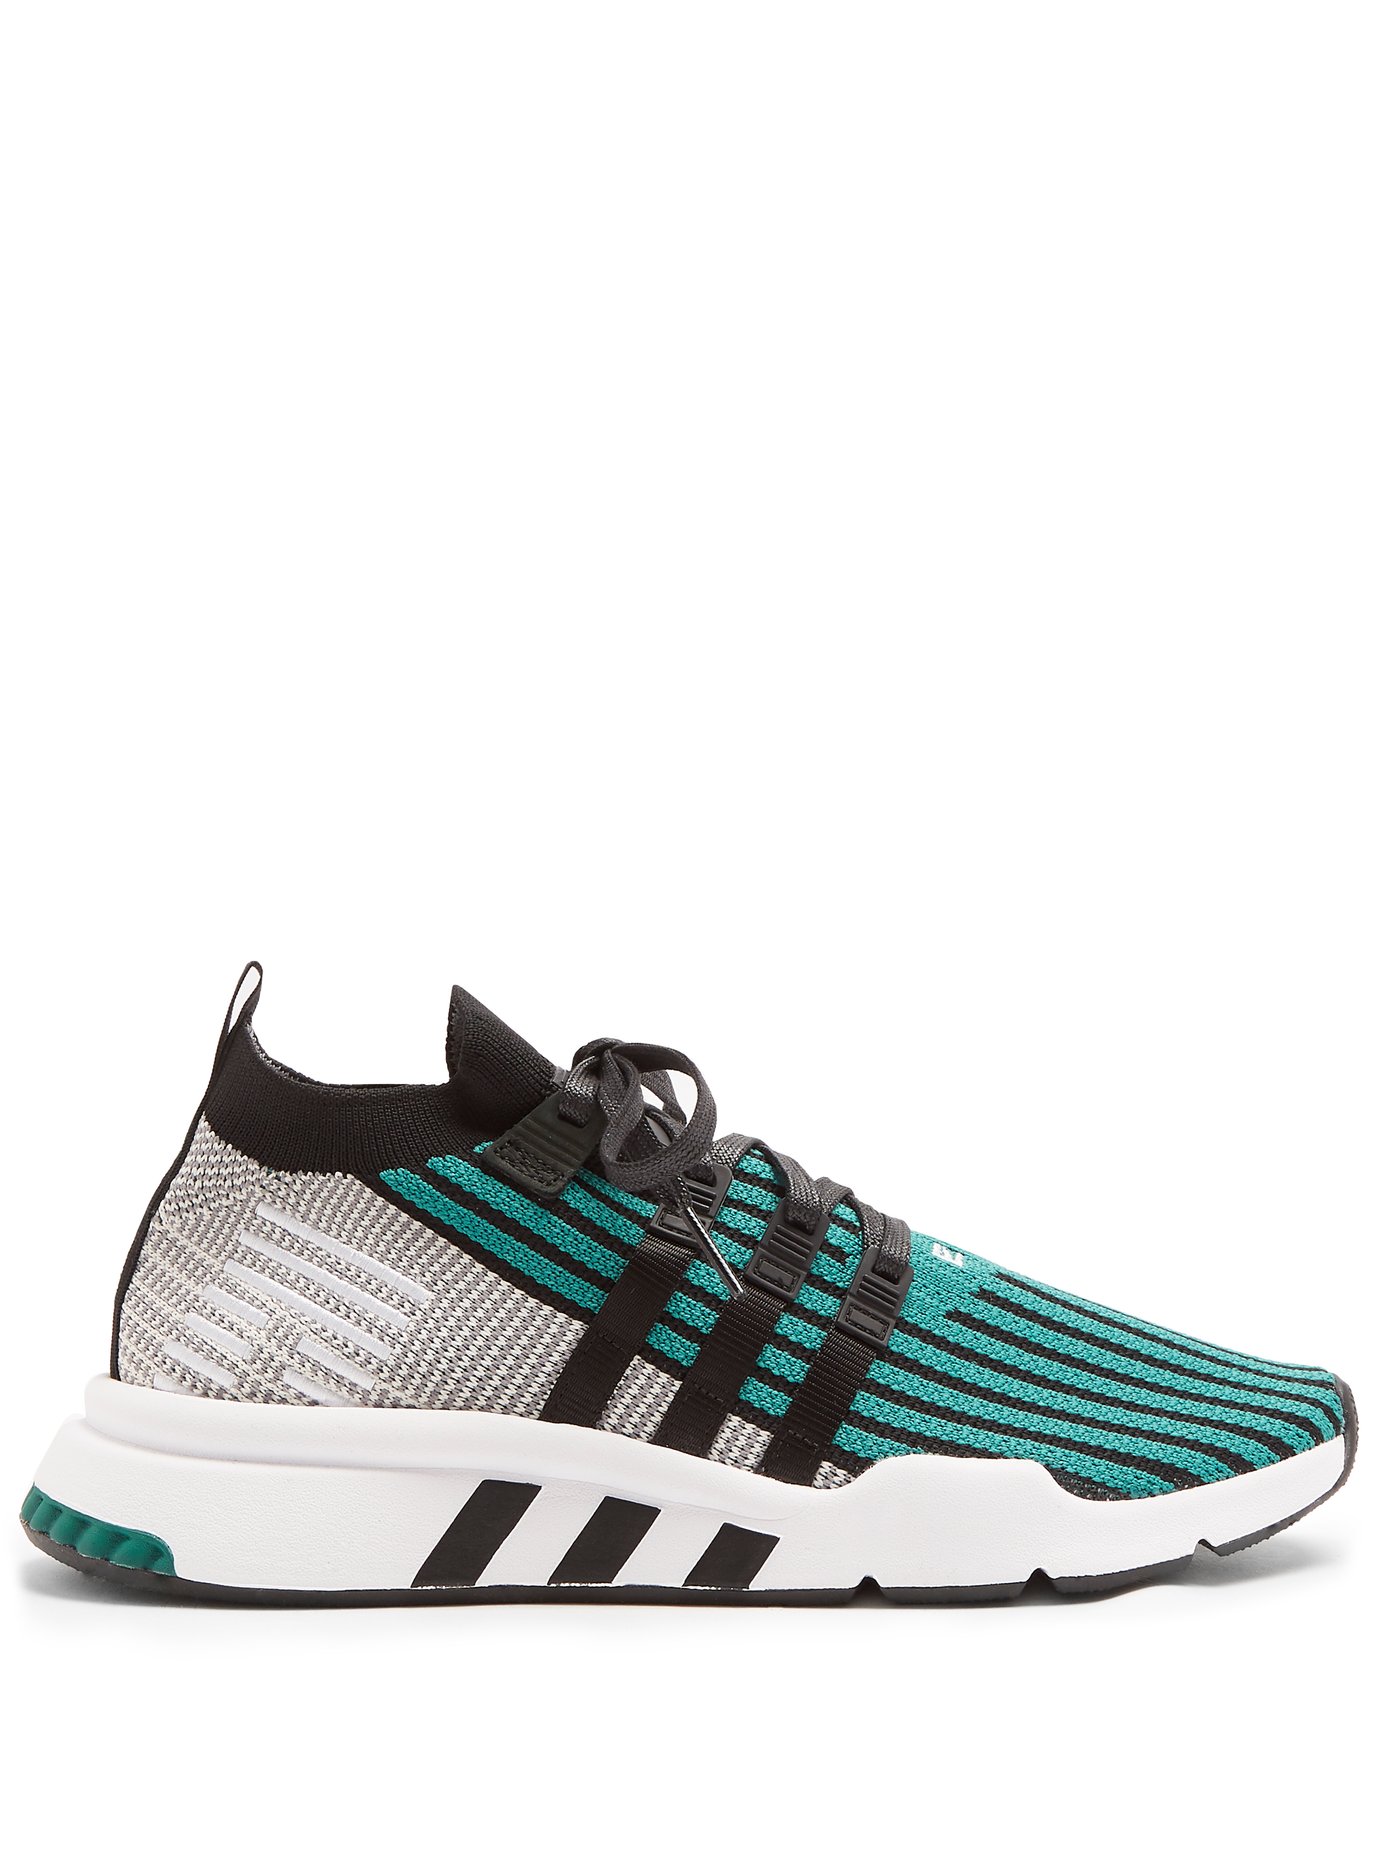 EQT Support low-top trainers | Adidas | MATCHESFASHION US